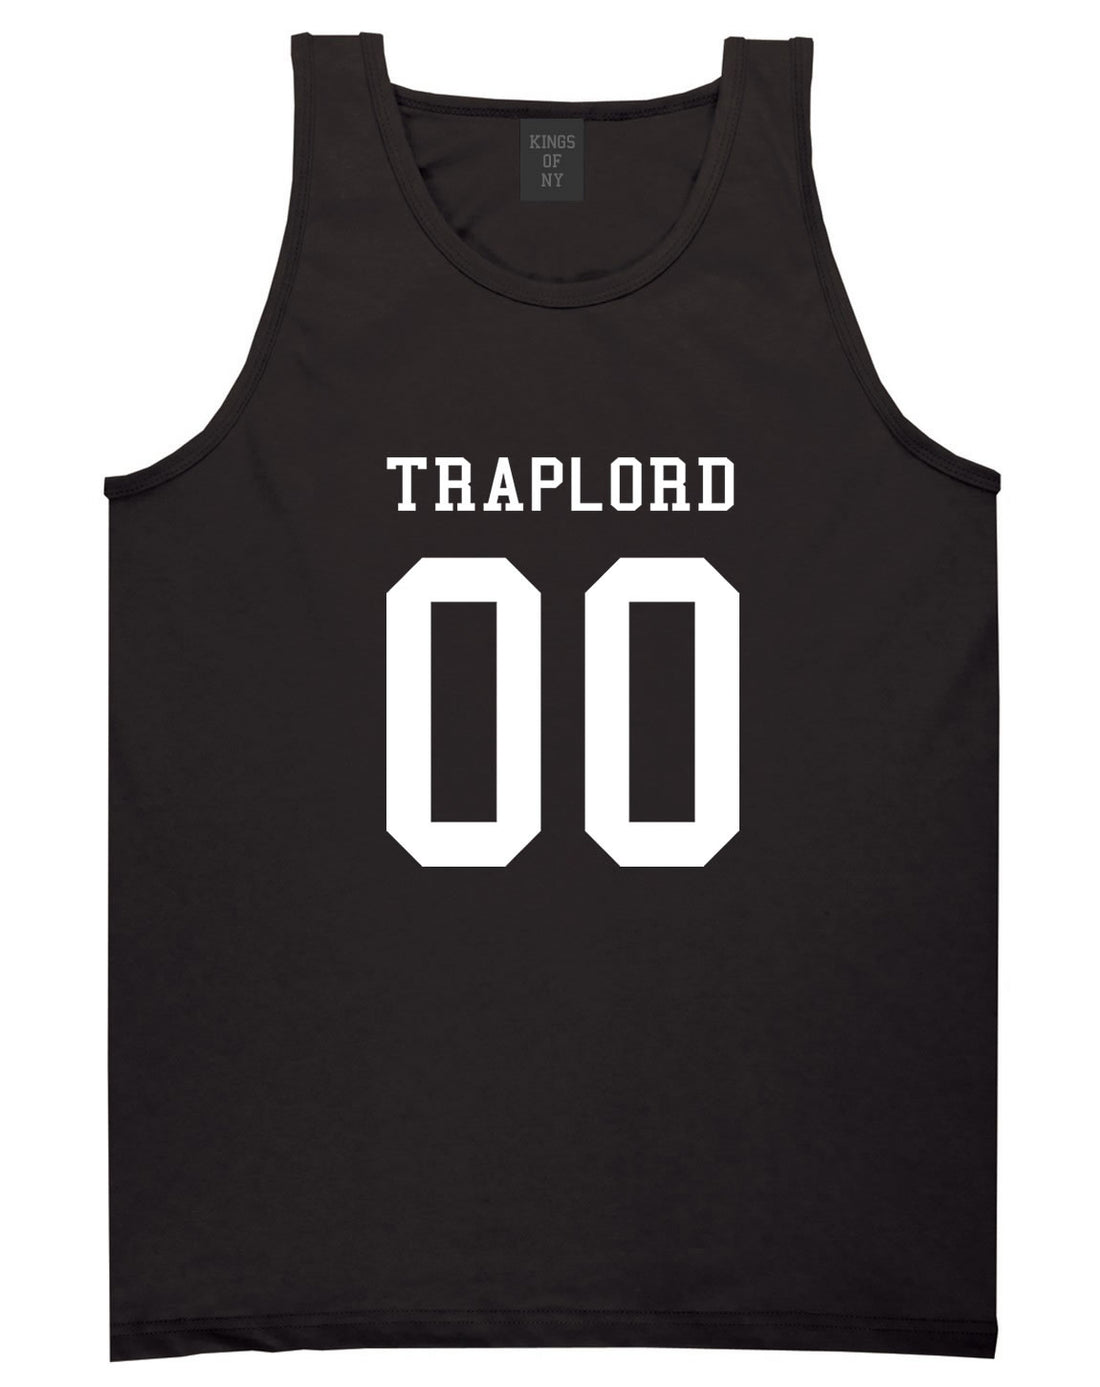 Traplord Team Jersey 00 Trap Lord Tank Top in Black By Kings Of NY